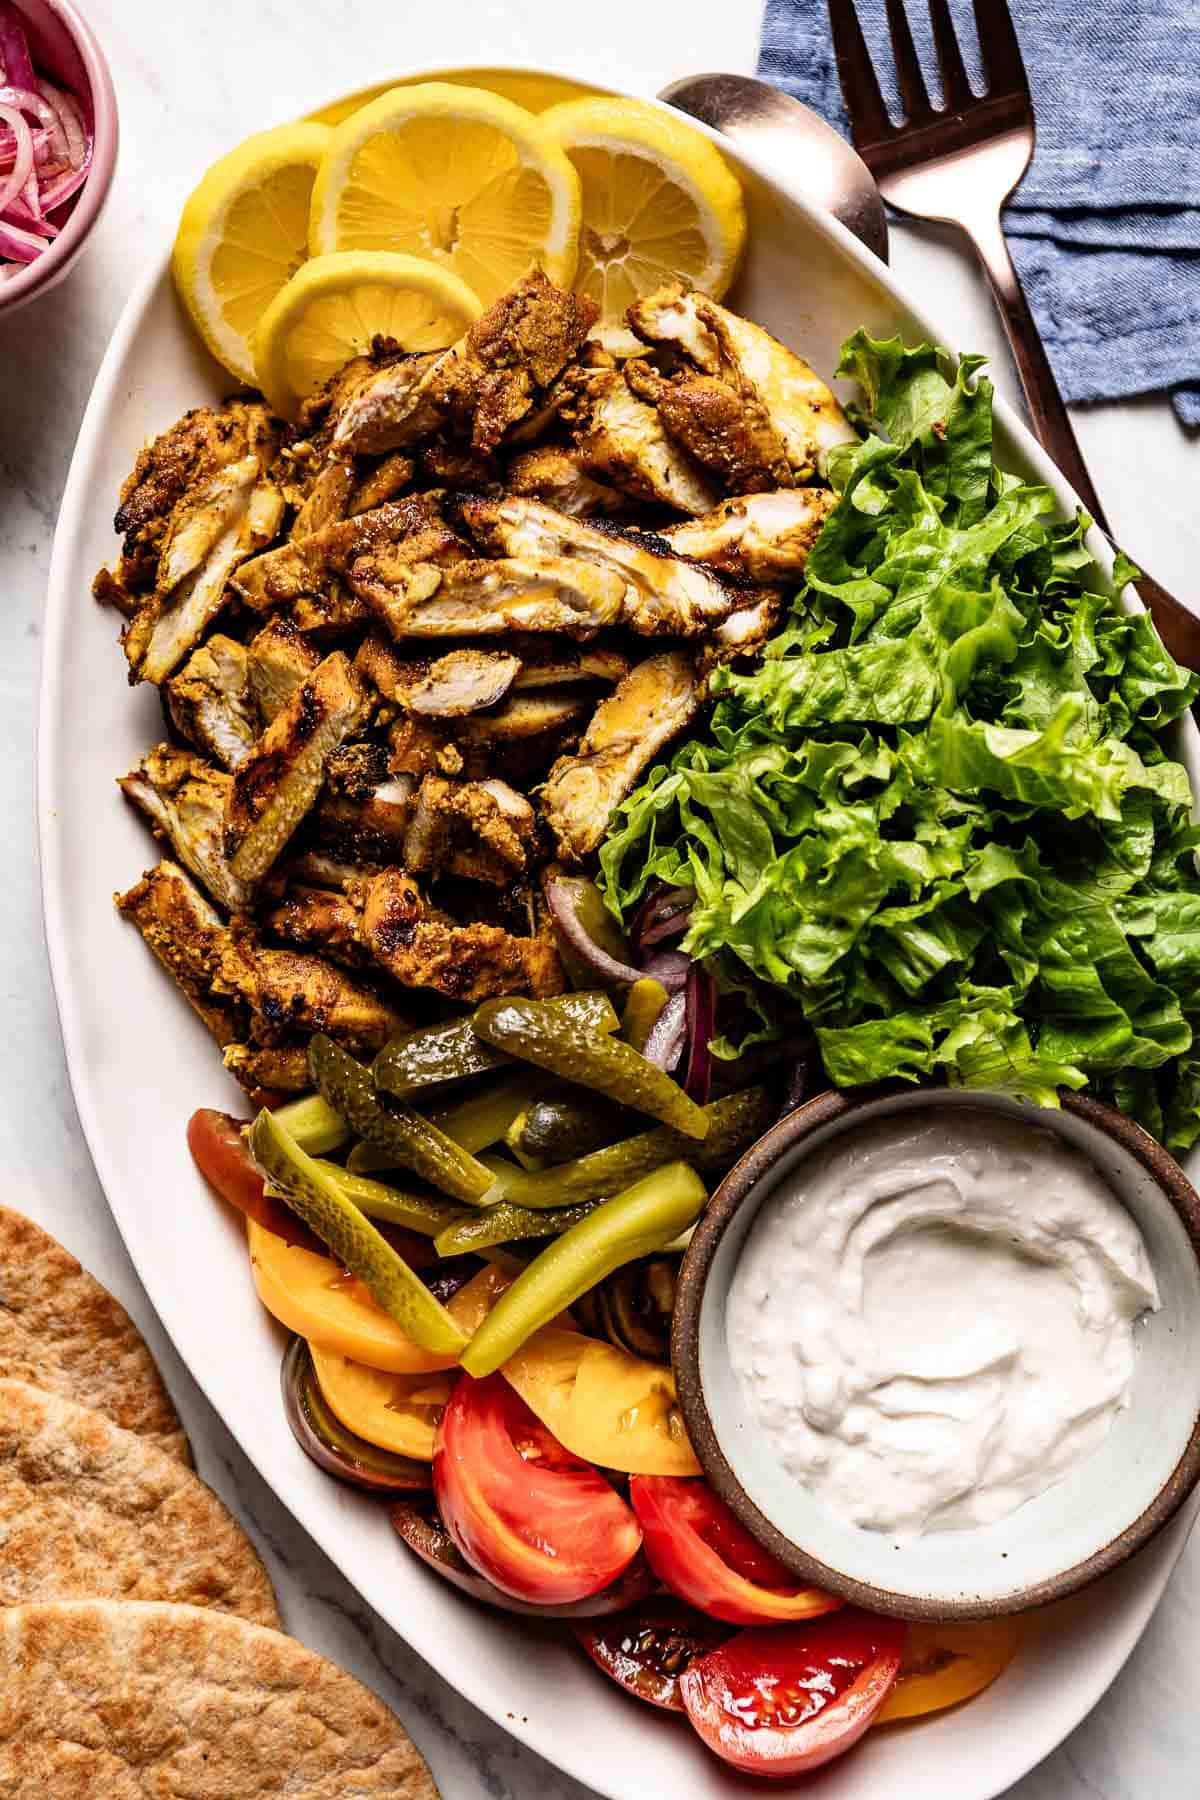 Mediterranean chicken shawarma served with pickles, lettuce, onion and tomatoes on a plate.